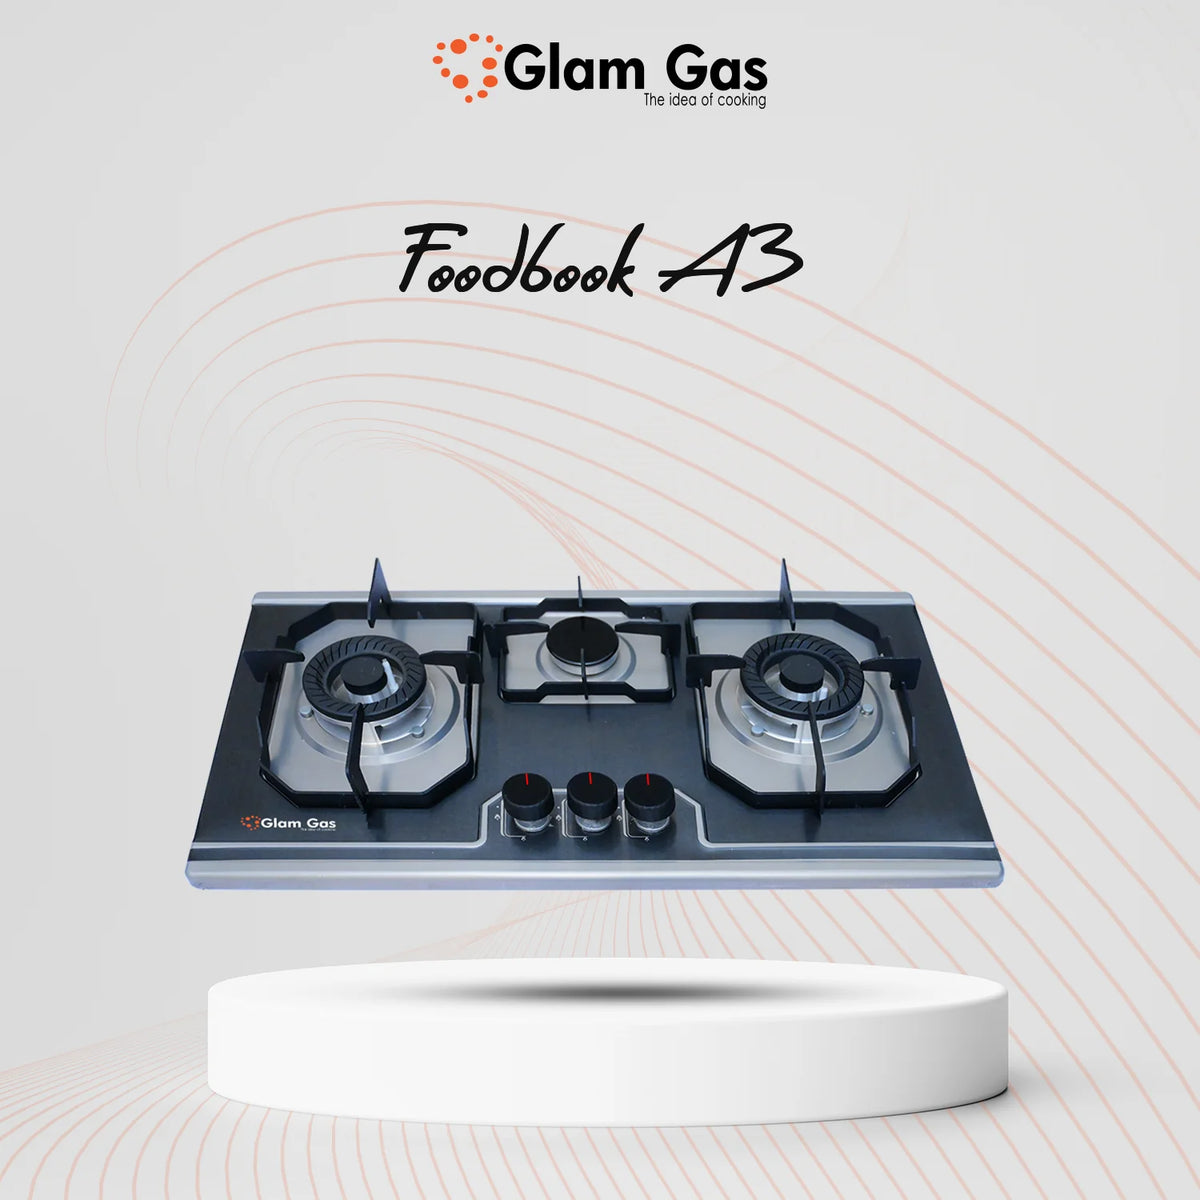 Glam Gas Food book-A3 Hob |3 Burner | Kitchen Gas Stove | Gas Stove  1 Year Brand Warranty